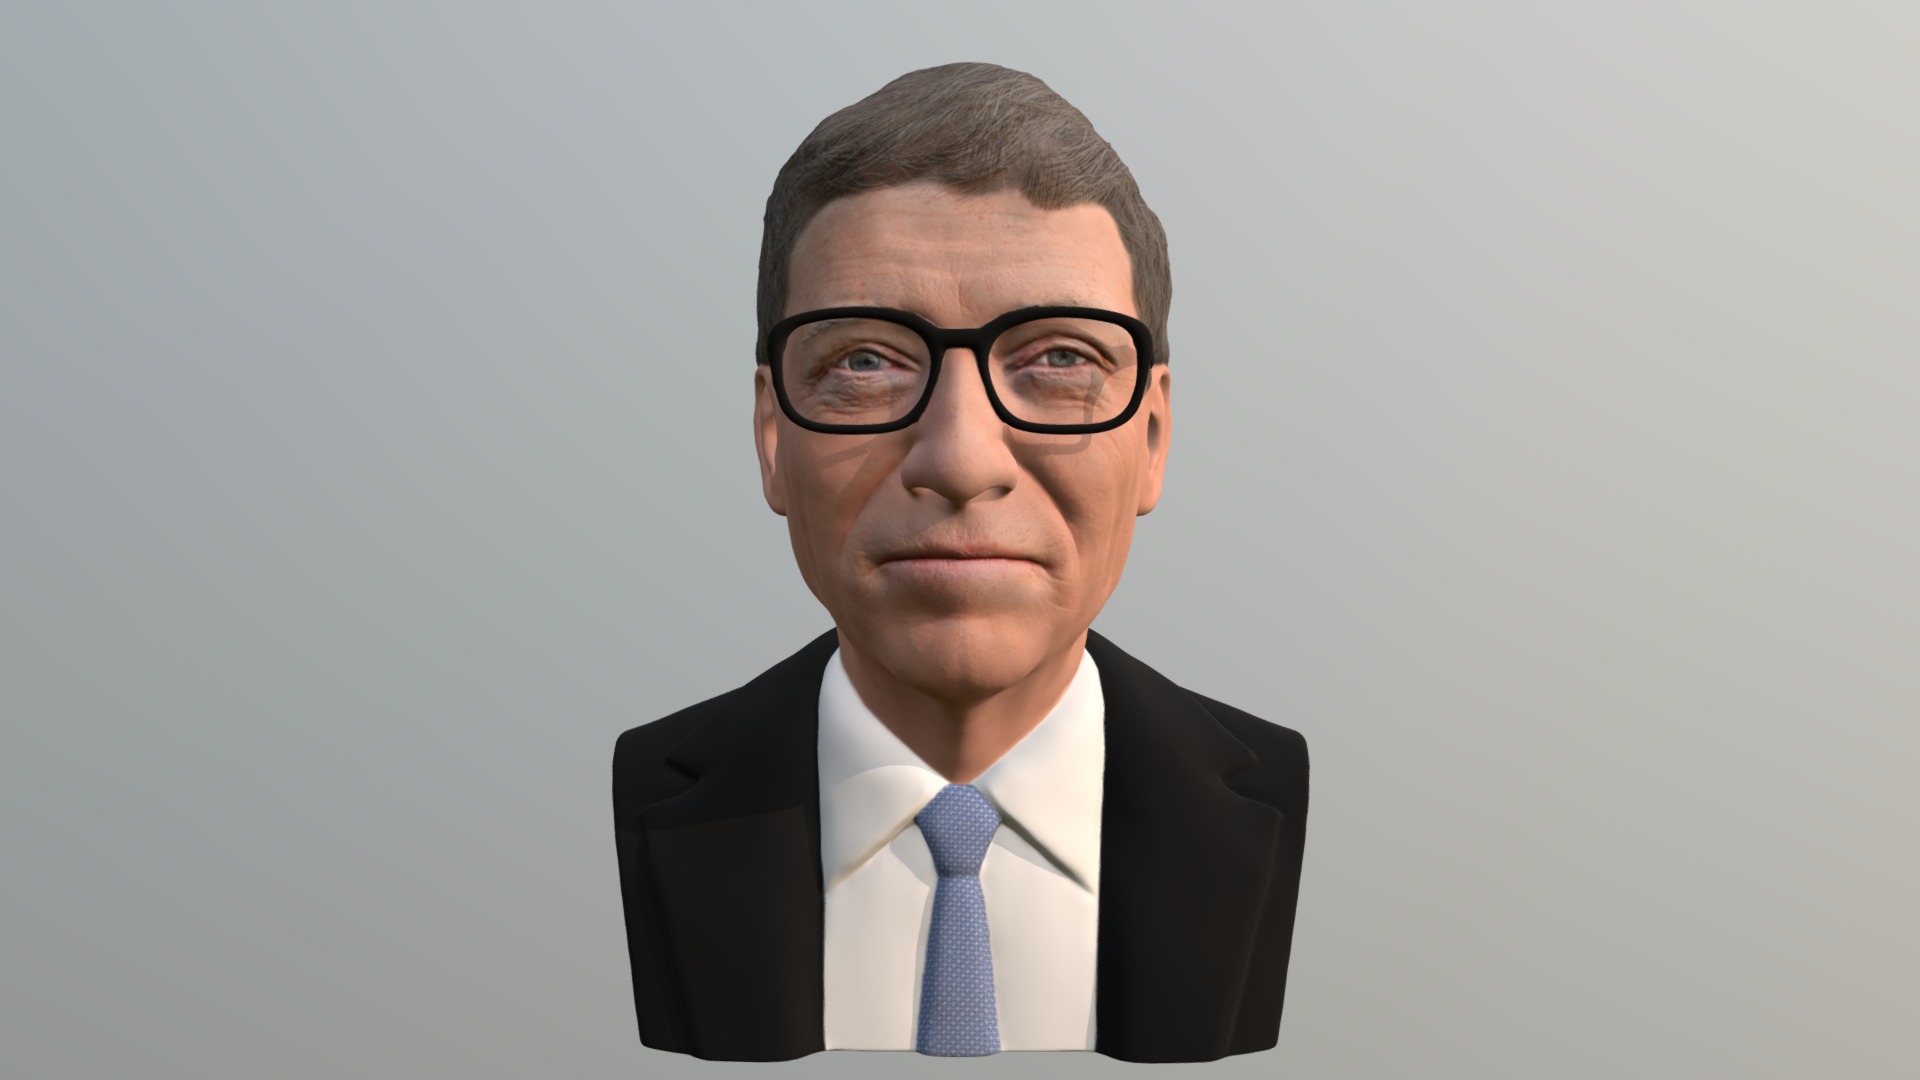 3D model Bill Gates bust for full color 3D printing - This is a 3D model of the Bill Gates bust for full color 3D printing. The 3D model is about a man wearing glasses and a suit.